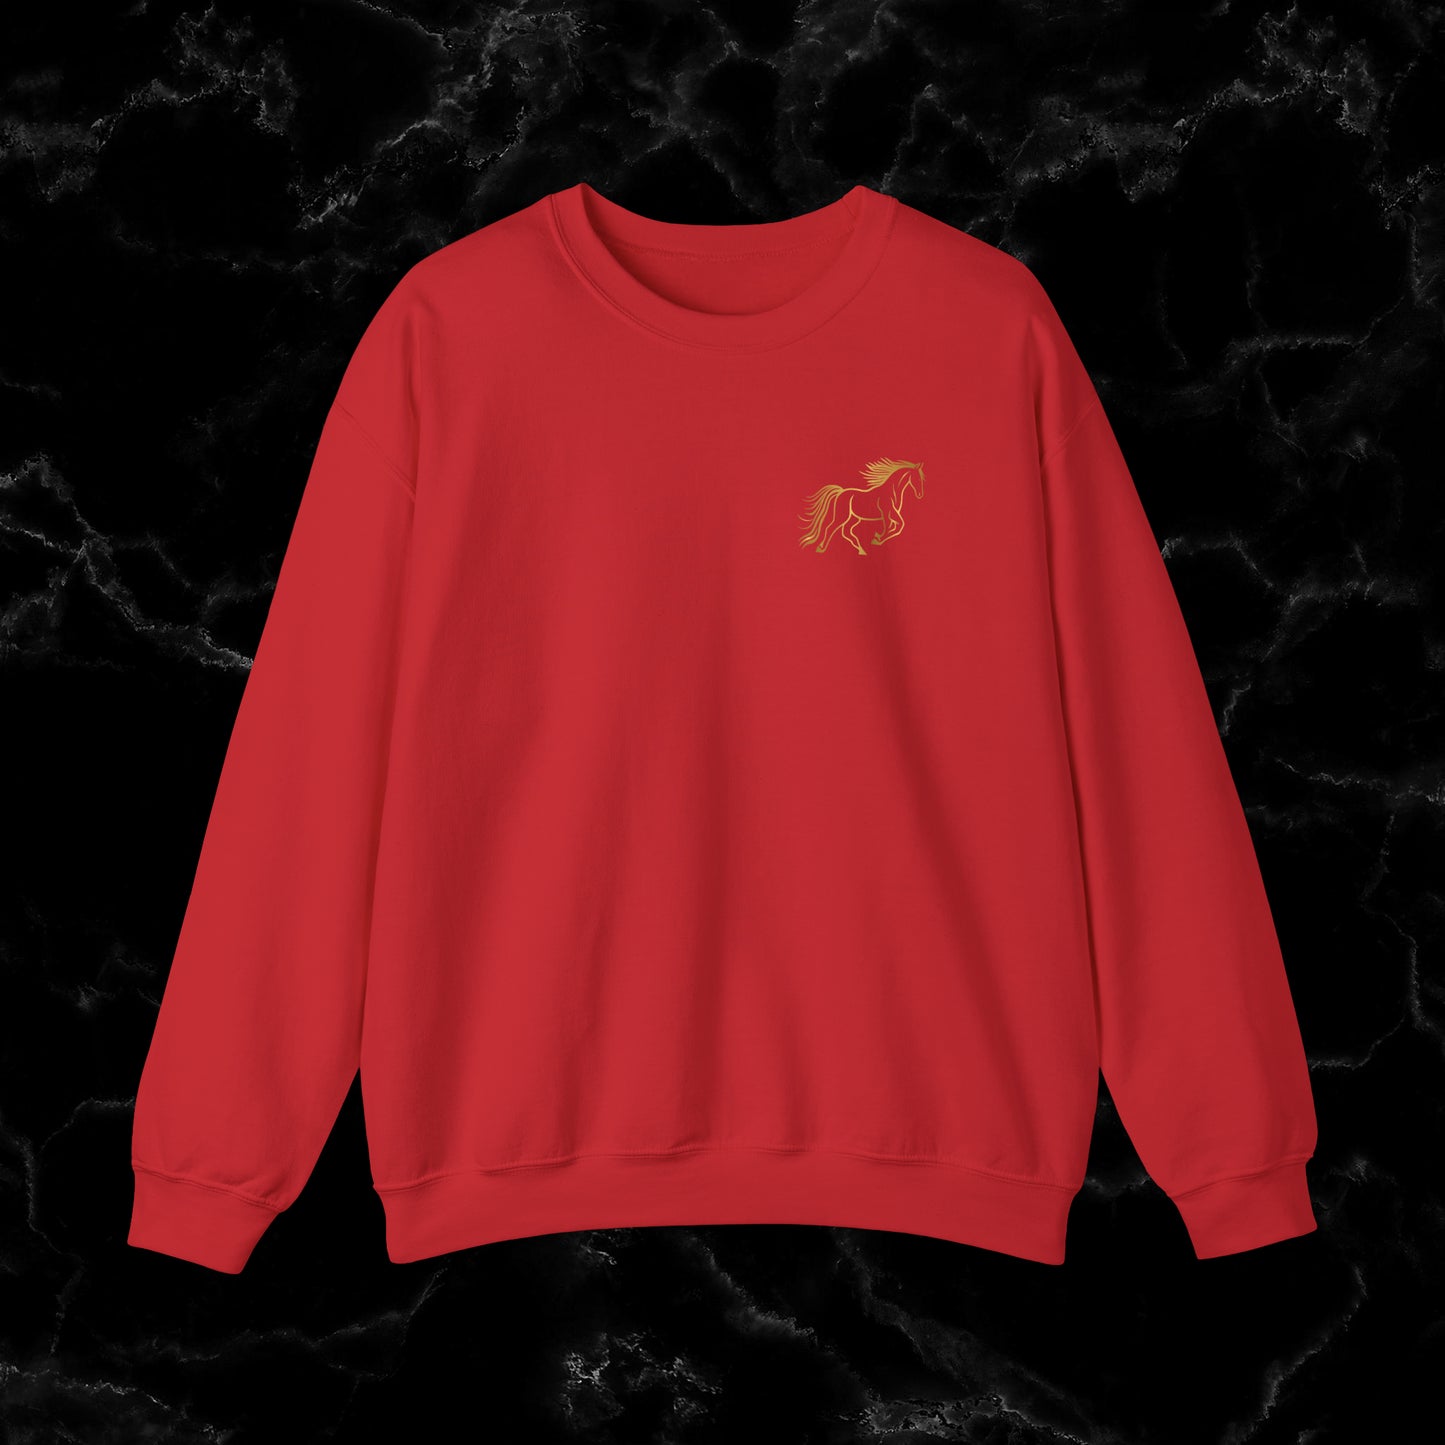 Personalized Horse Sweatshirt - Gift for Horse Owner, Perfect for Christmas, Birthdays, and Equestrian Enthusiasts Sweatshirt S Red 